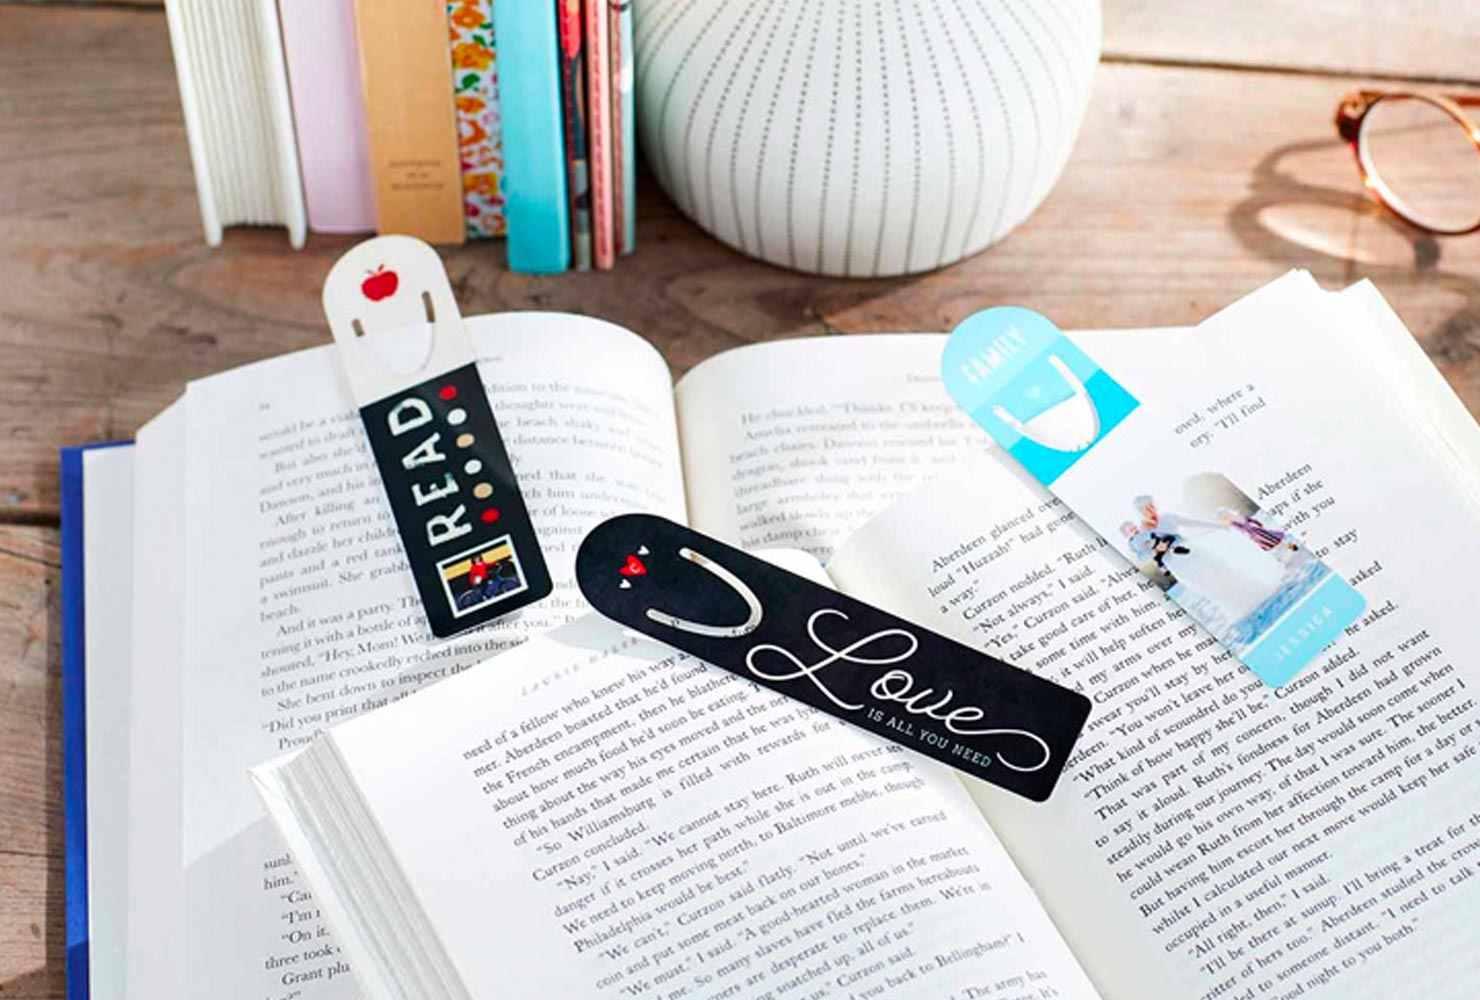 20 dollar gift ideas personalized book mark.